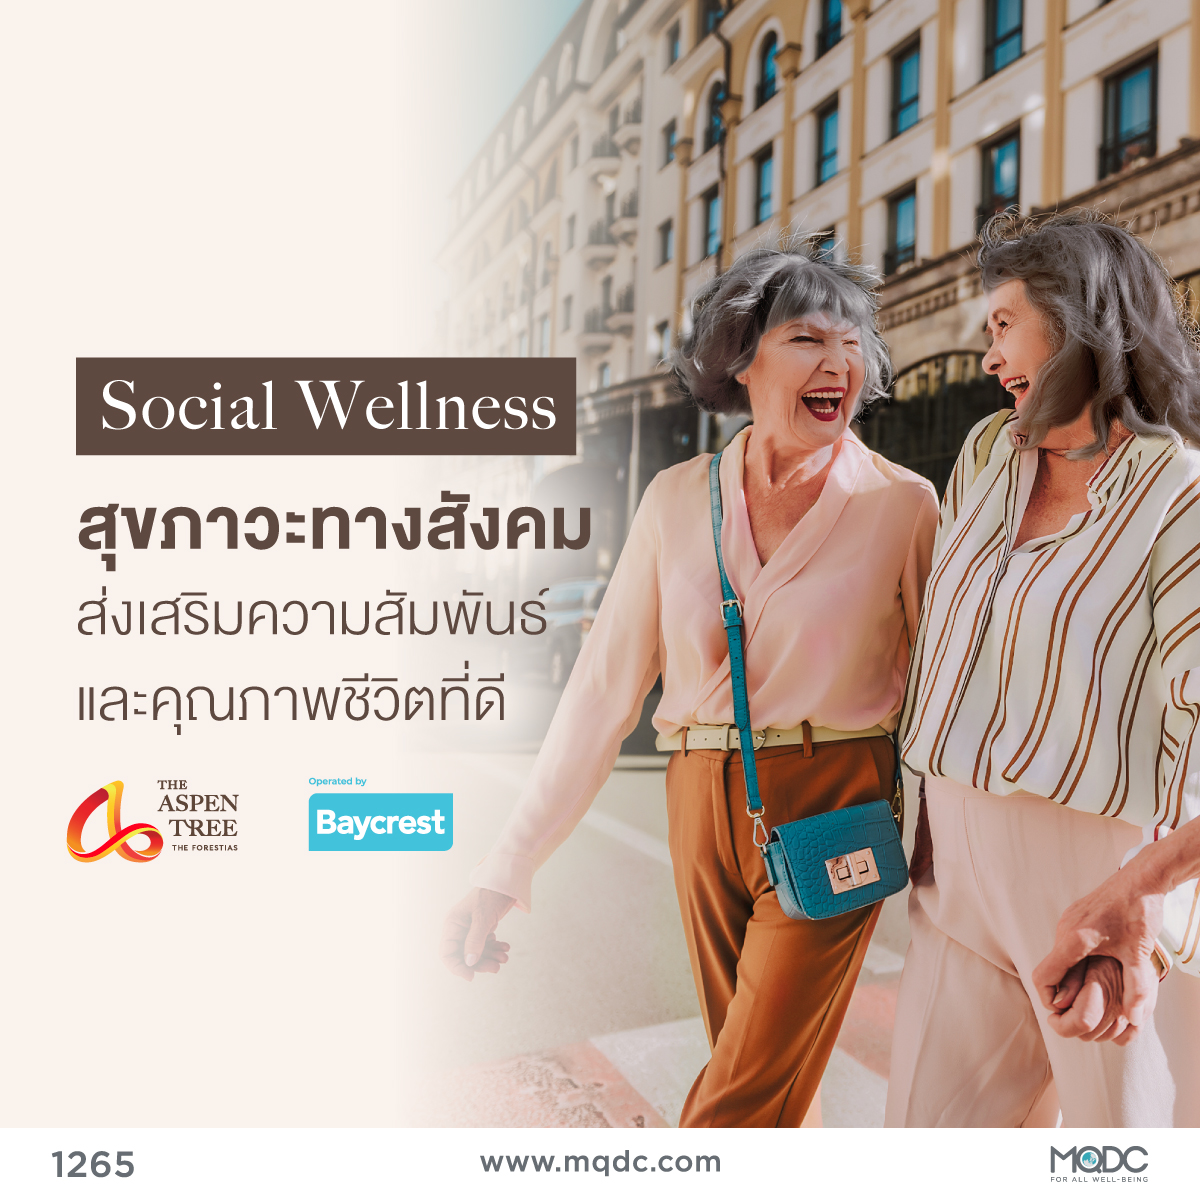 How Social Wellness Boosts Your Quality of Life